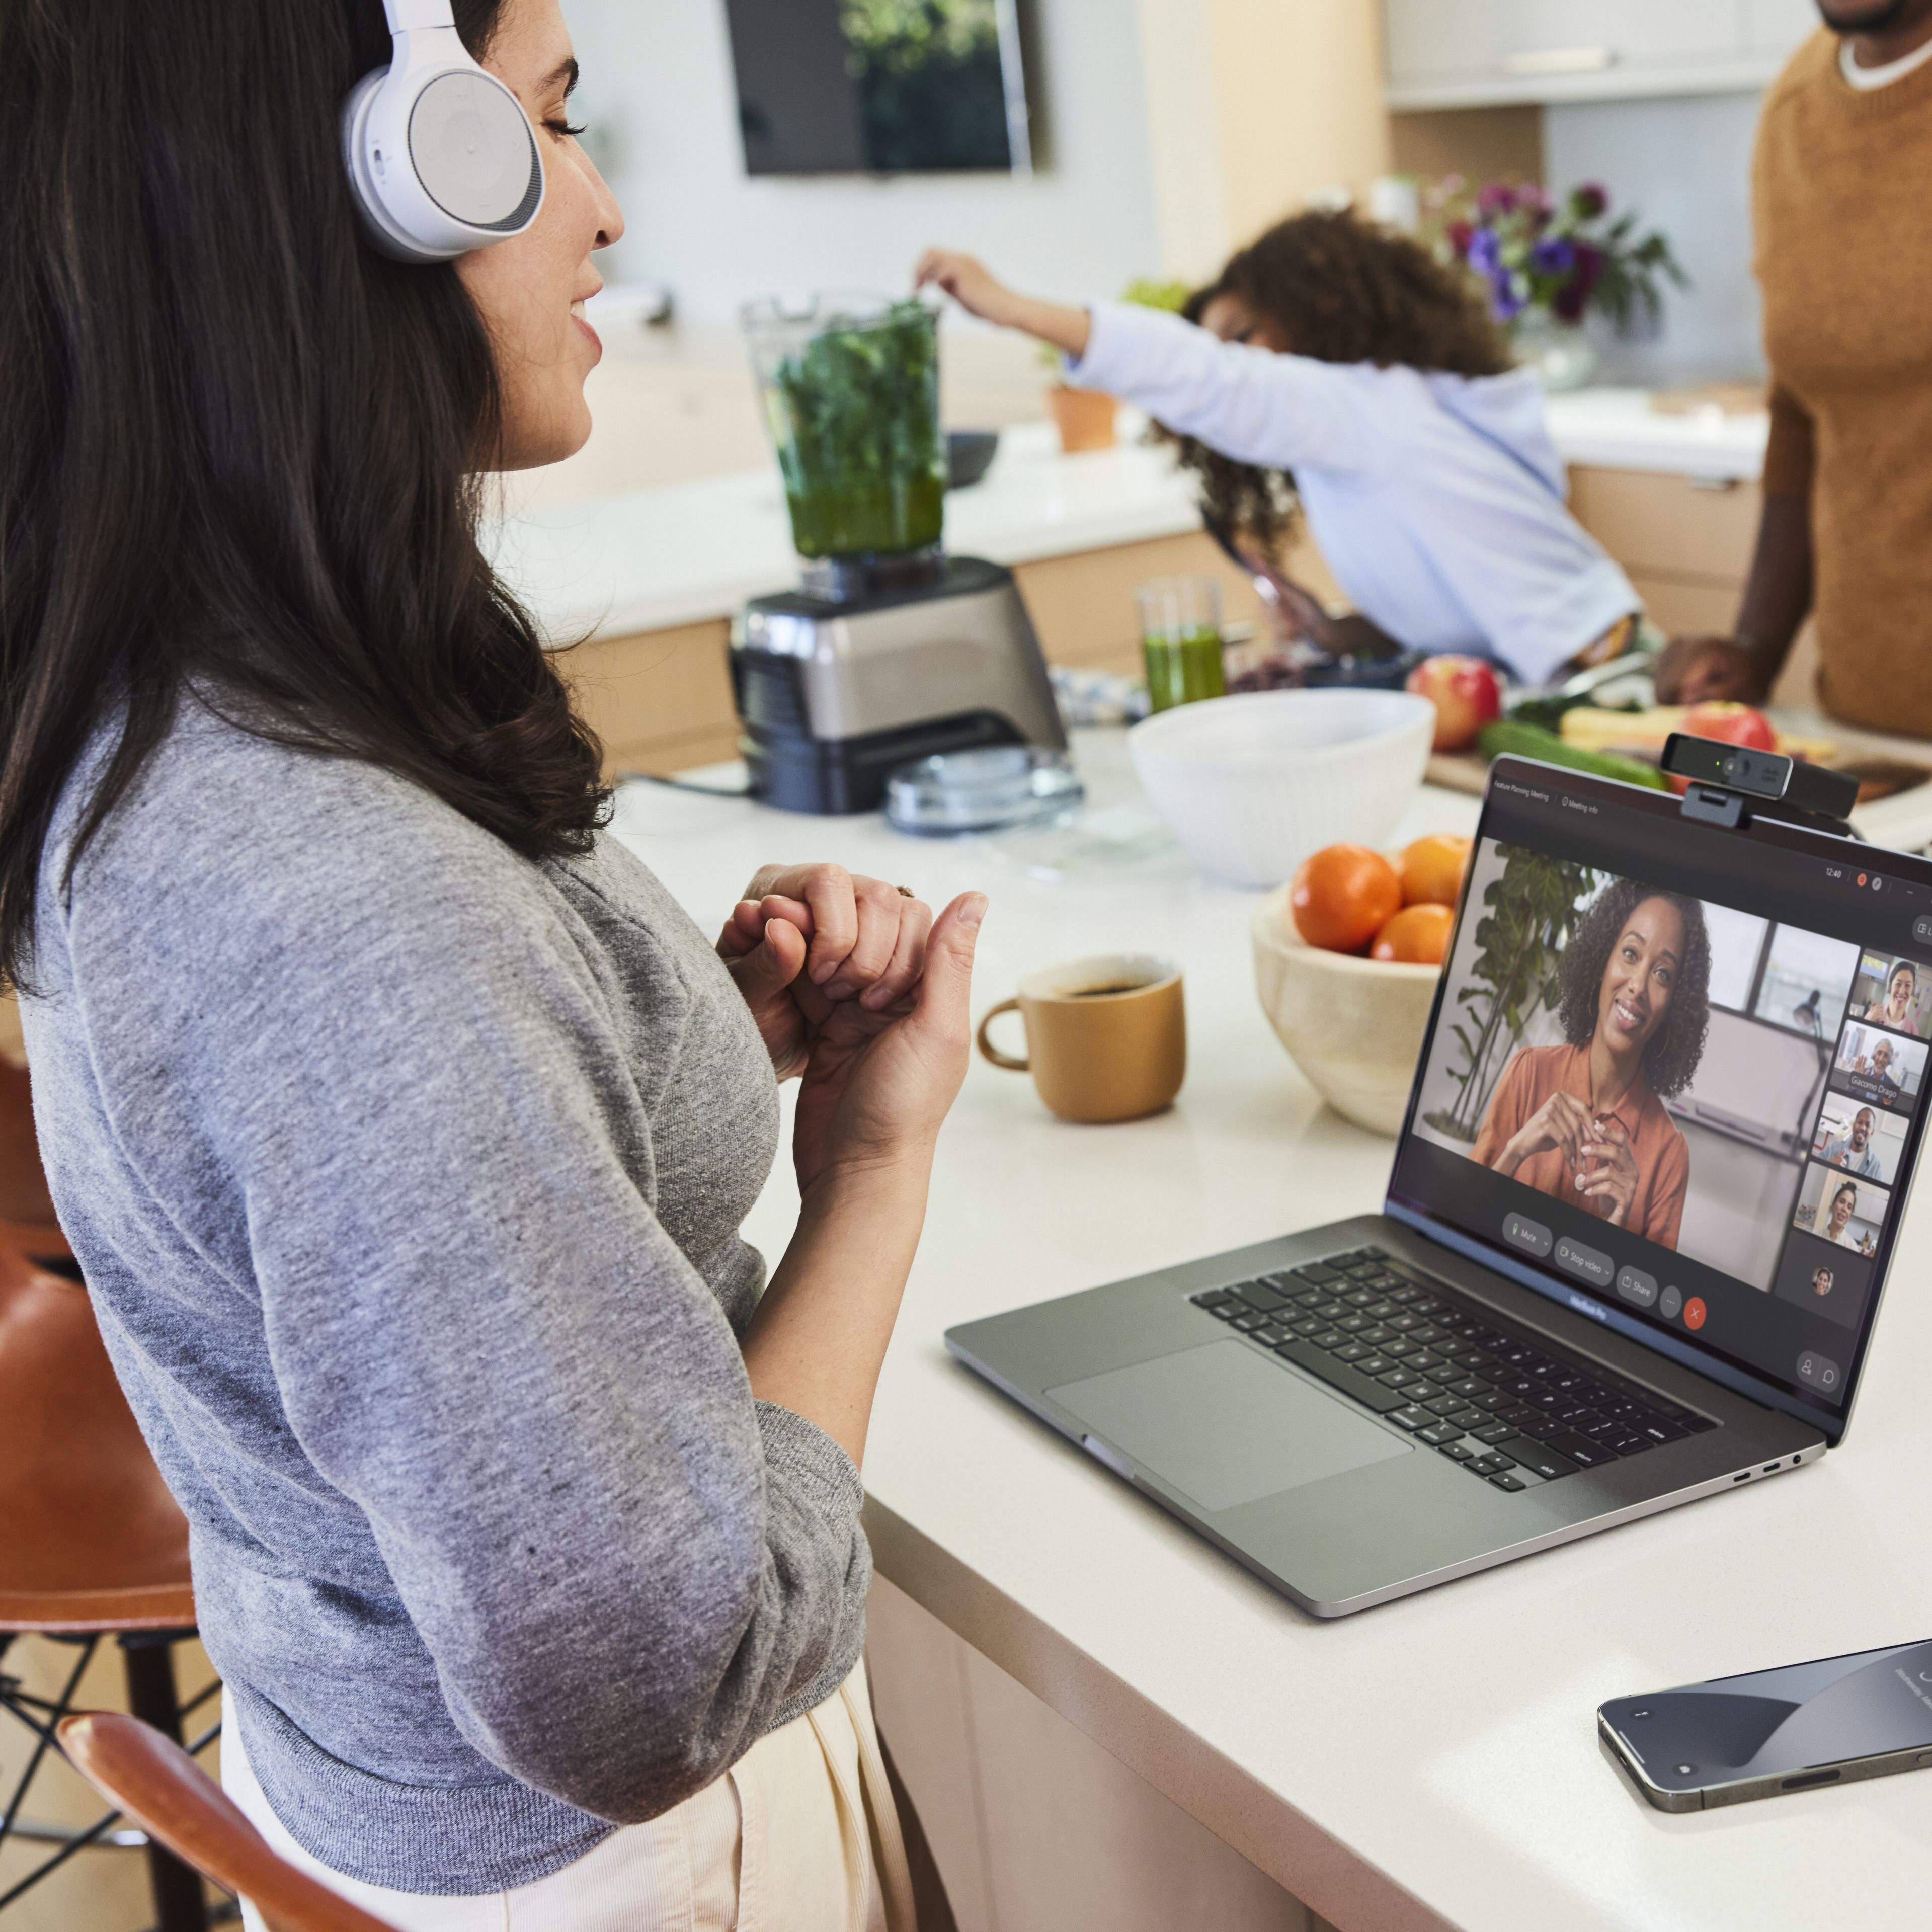 Person in a headset video conferences from their kitchen while their partner and child make a smoothie in the background.